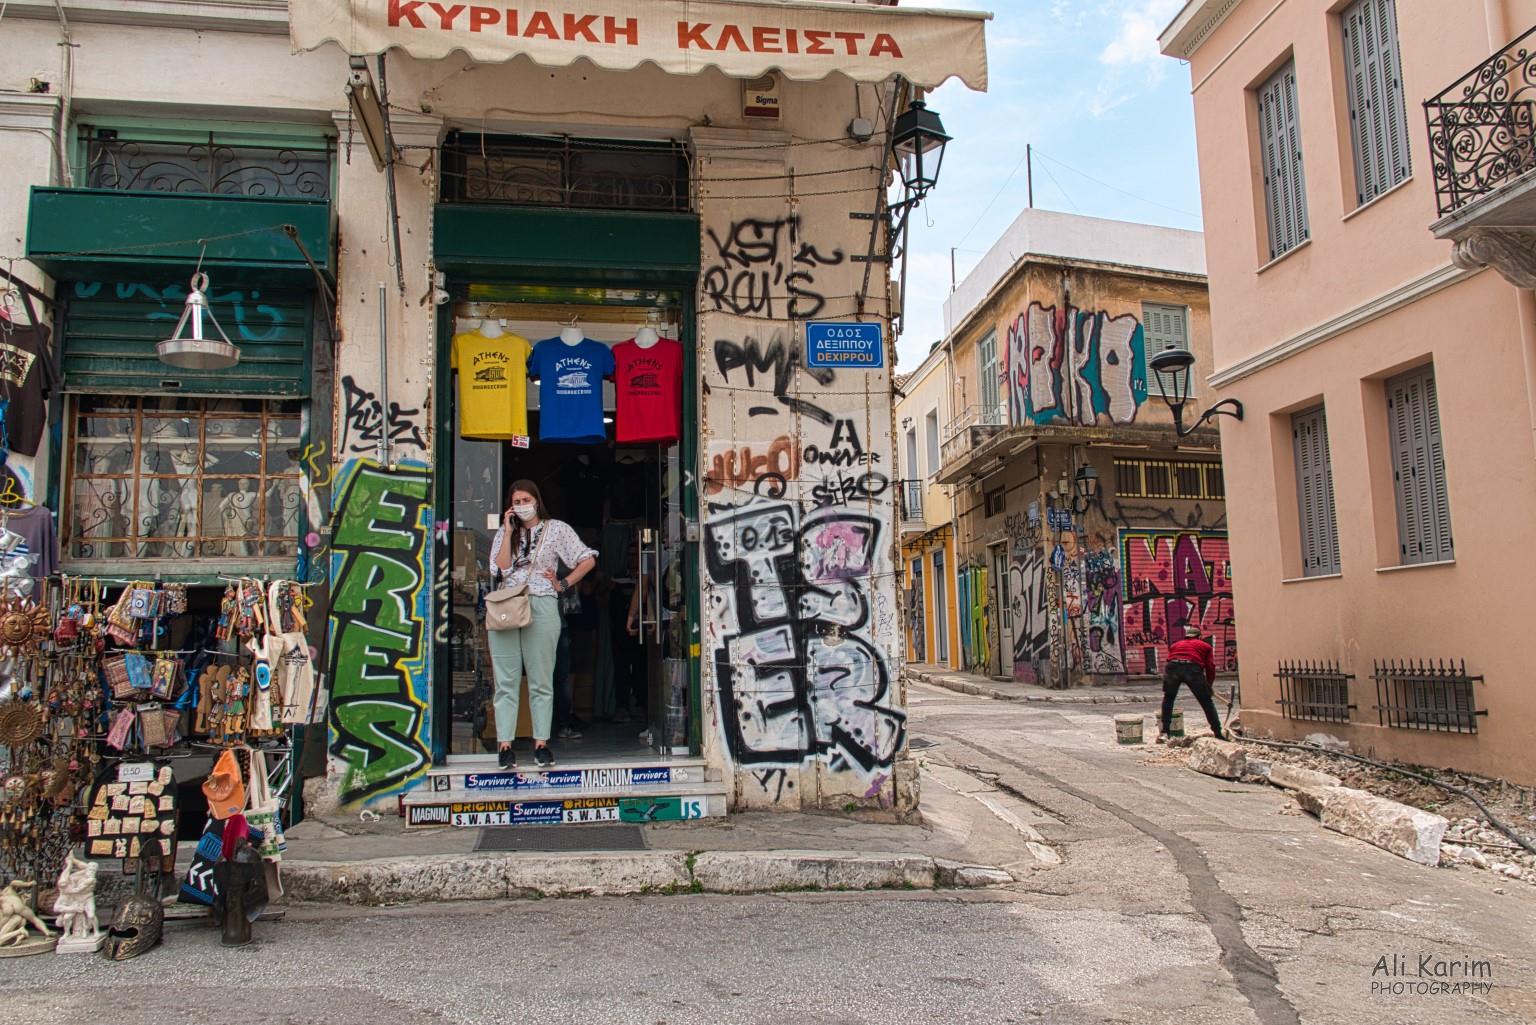 Athens, Greece, June, 2021, Life goes on in the streets around this old area